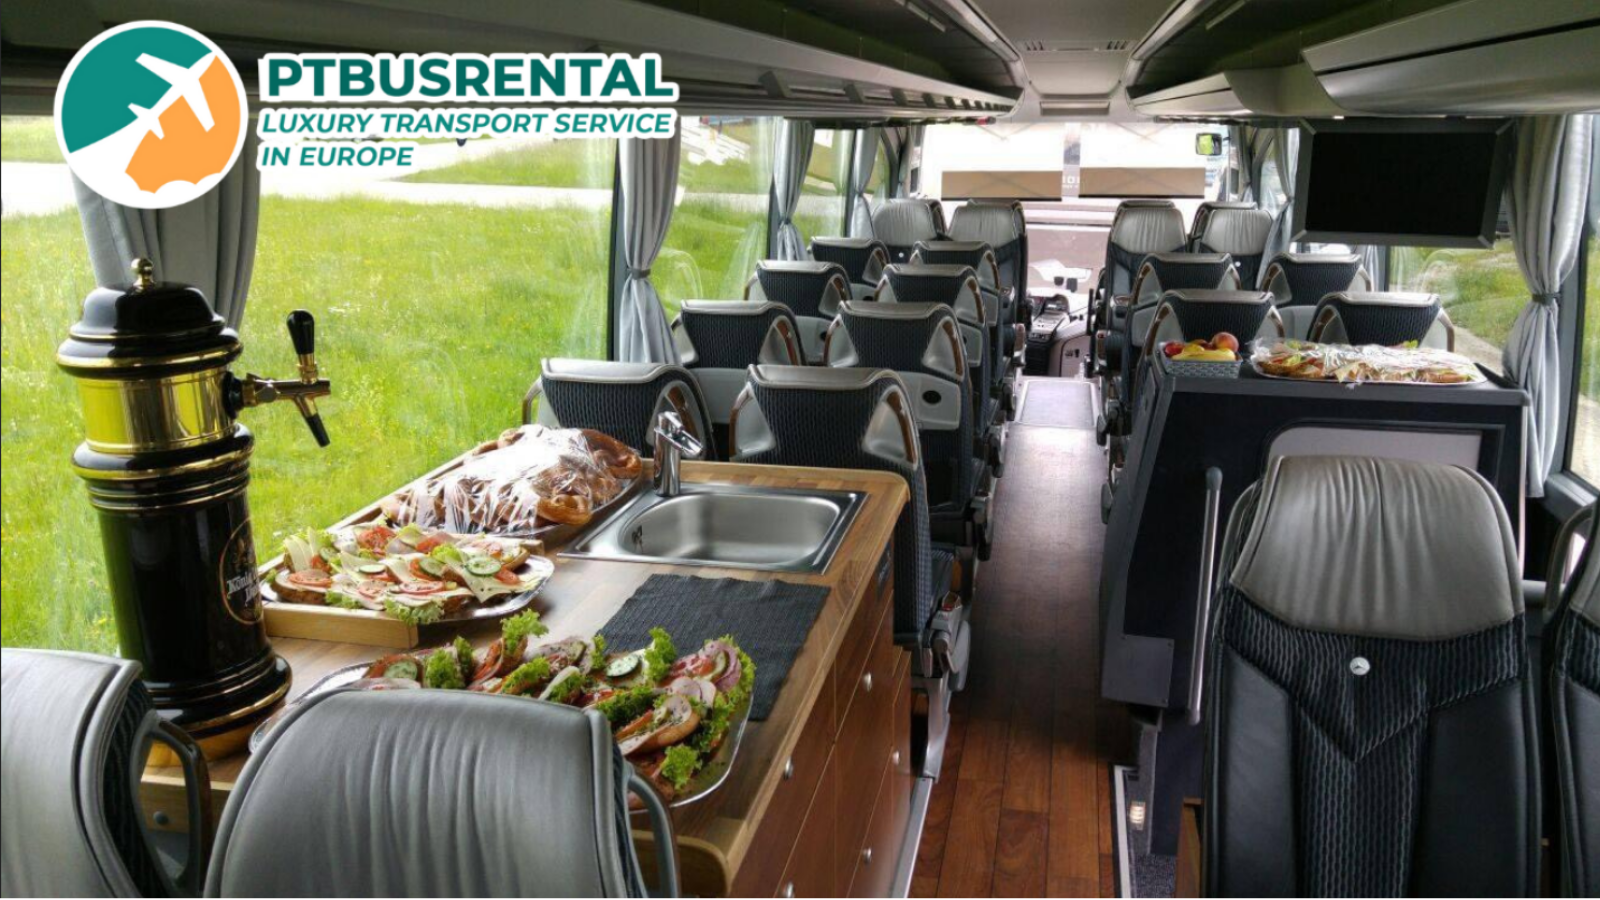 Join PTBusrental to do 10 best things to do in Portugal on the bus rental in Portugal trip